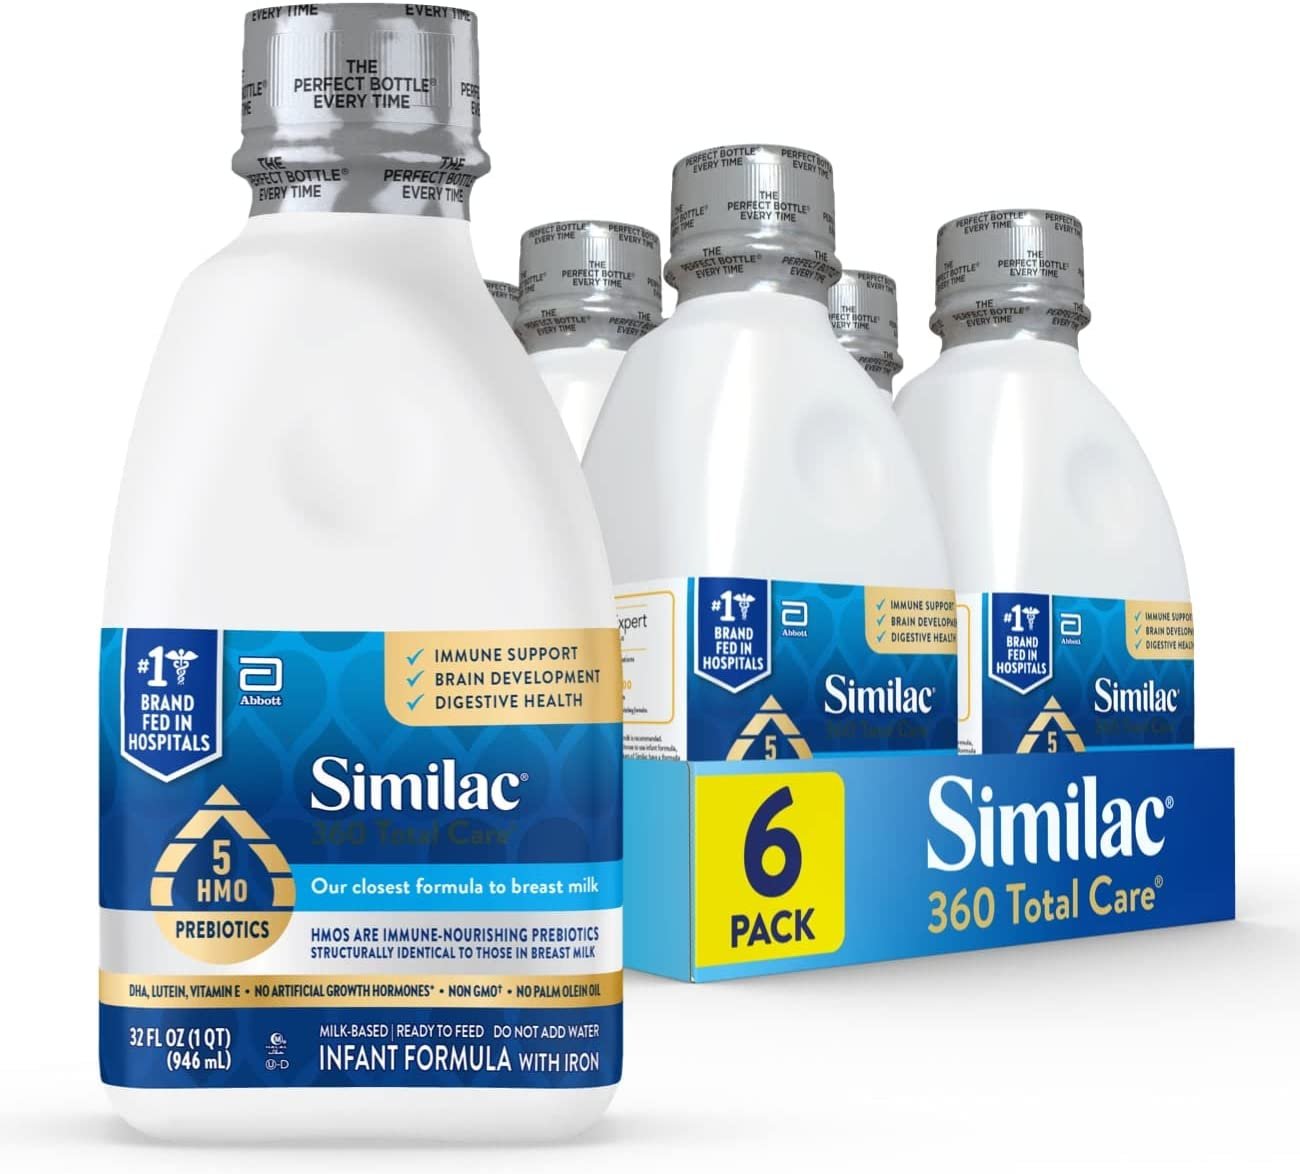 Similac 360 Total Care Infant Formula with 5 HMO, Ready-to-Feed 32-fl-oz Bottle (Case of 6)